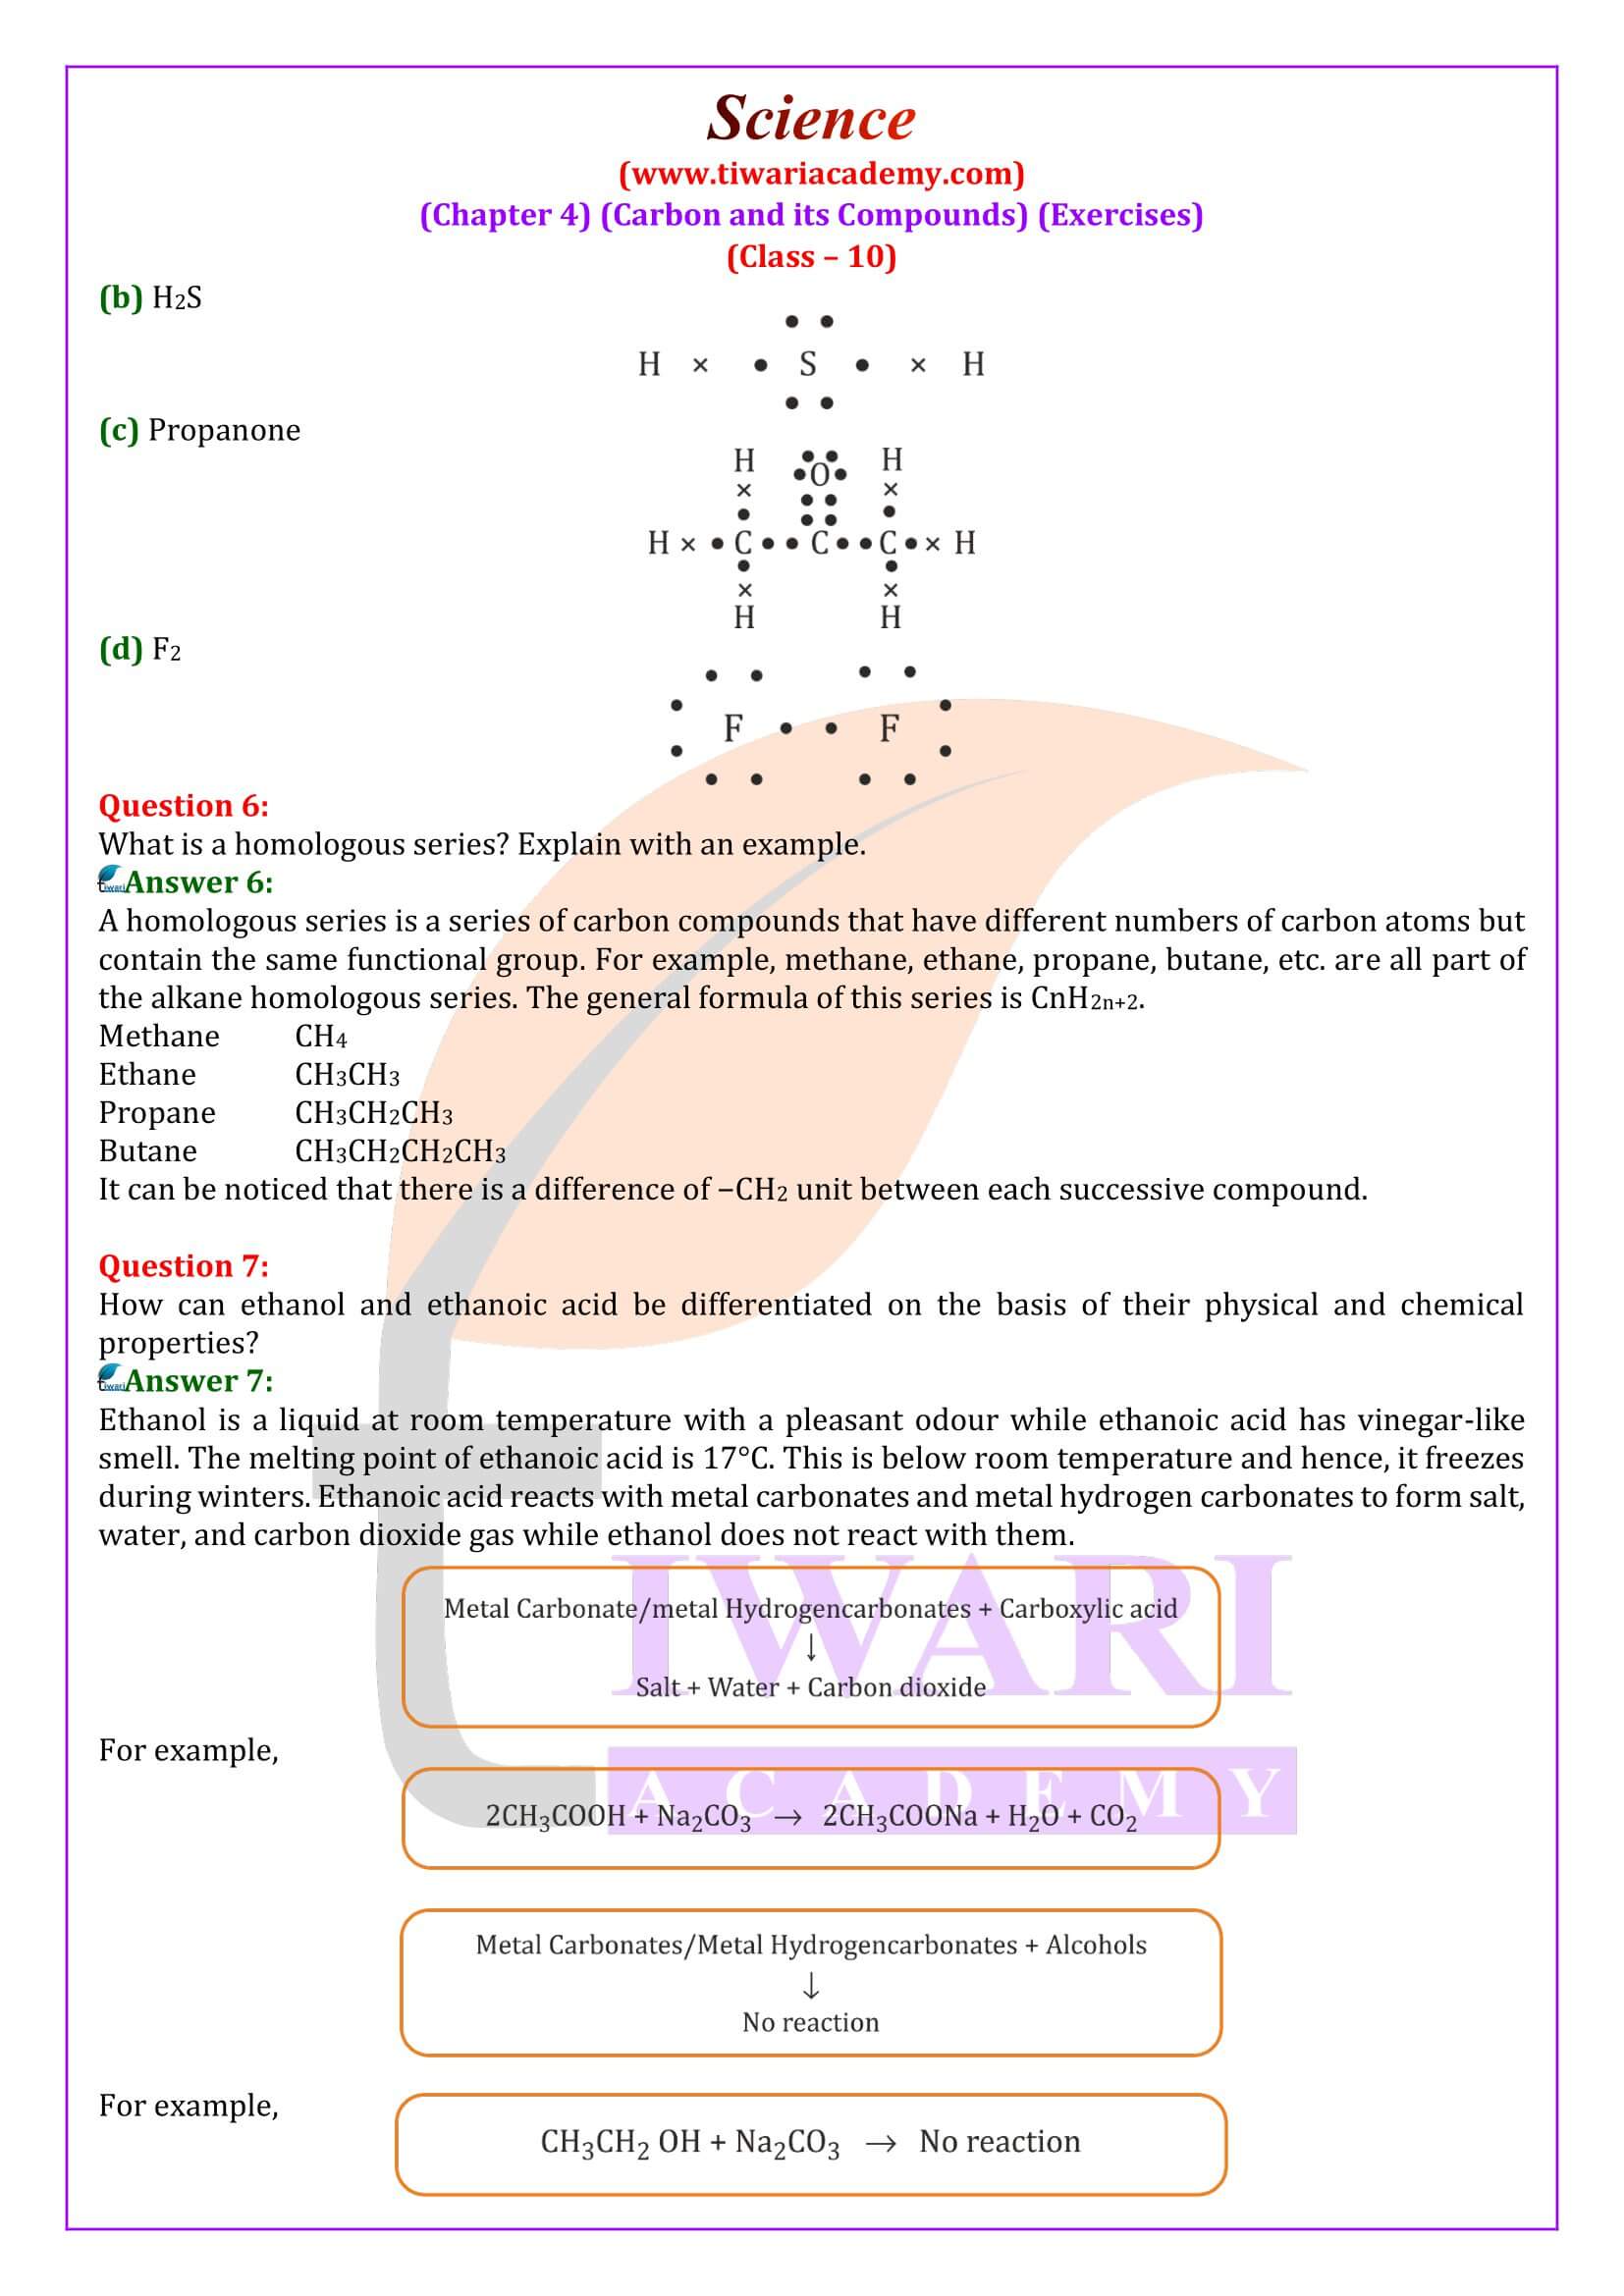 NCERT Solutions for Class 10 Science Chapter 4